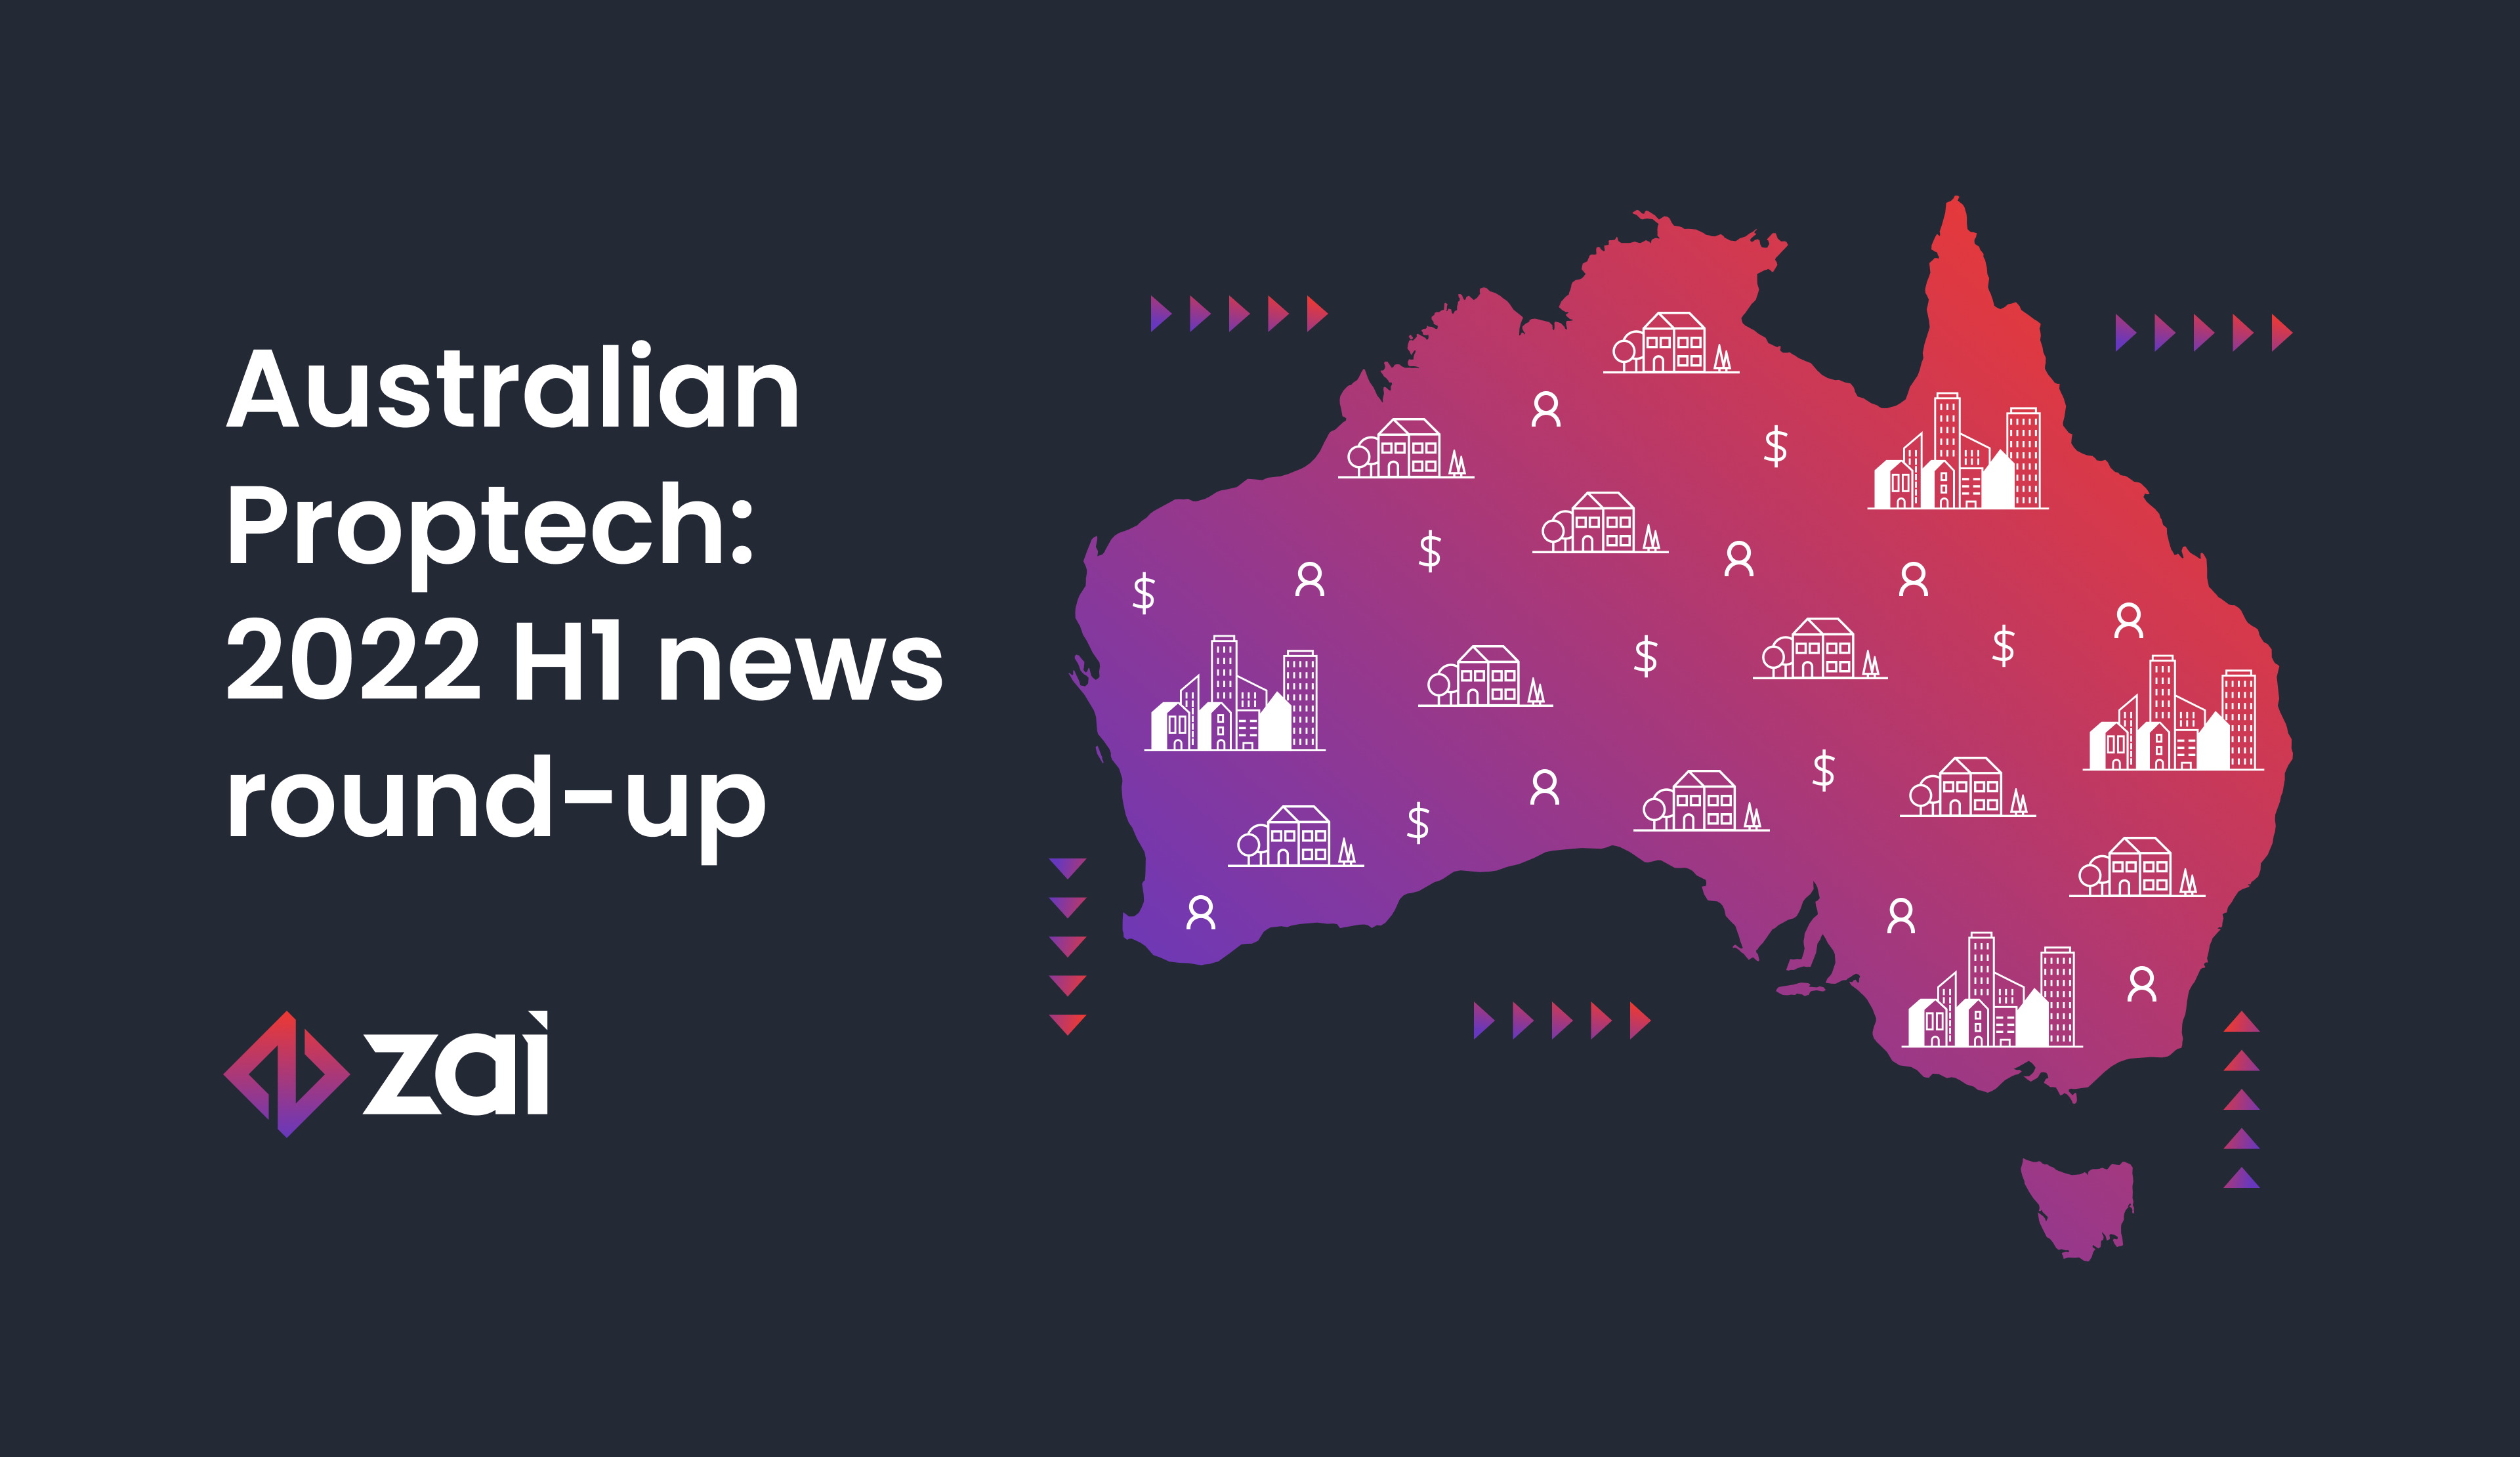 Australian proptech remains resilient in 2022